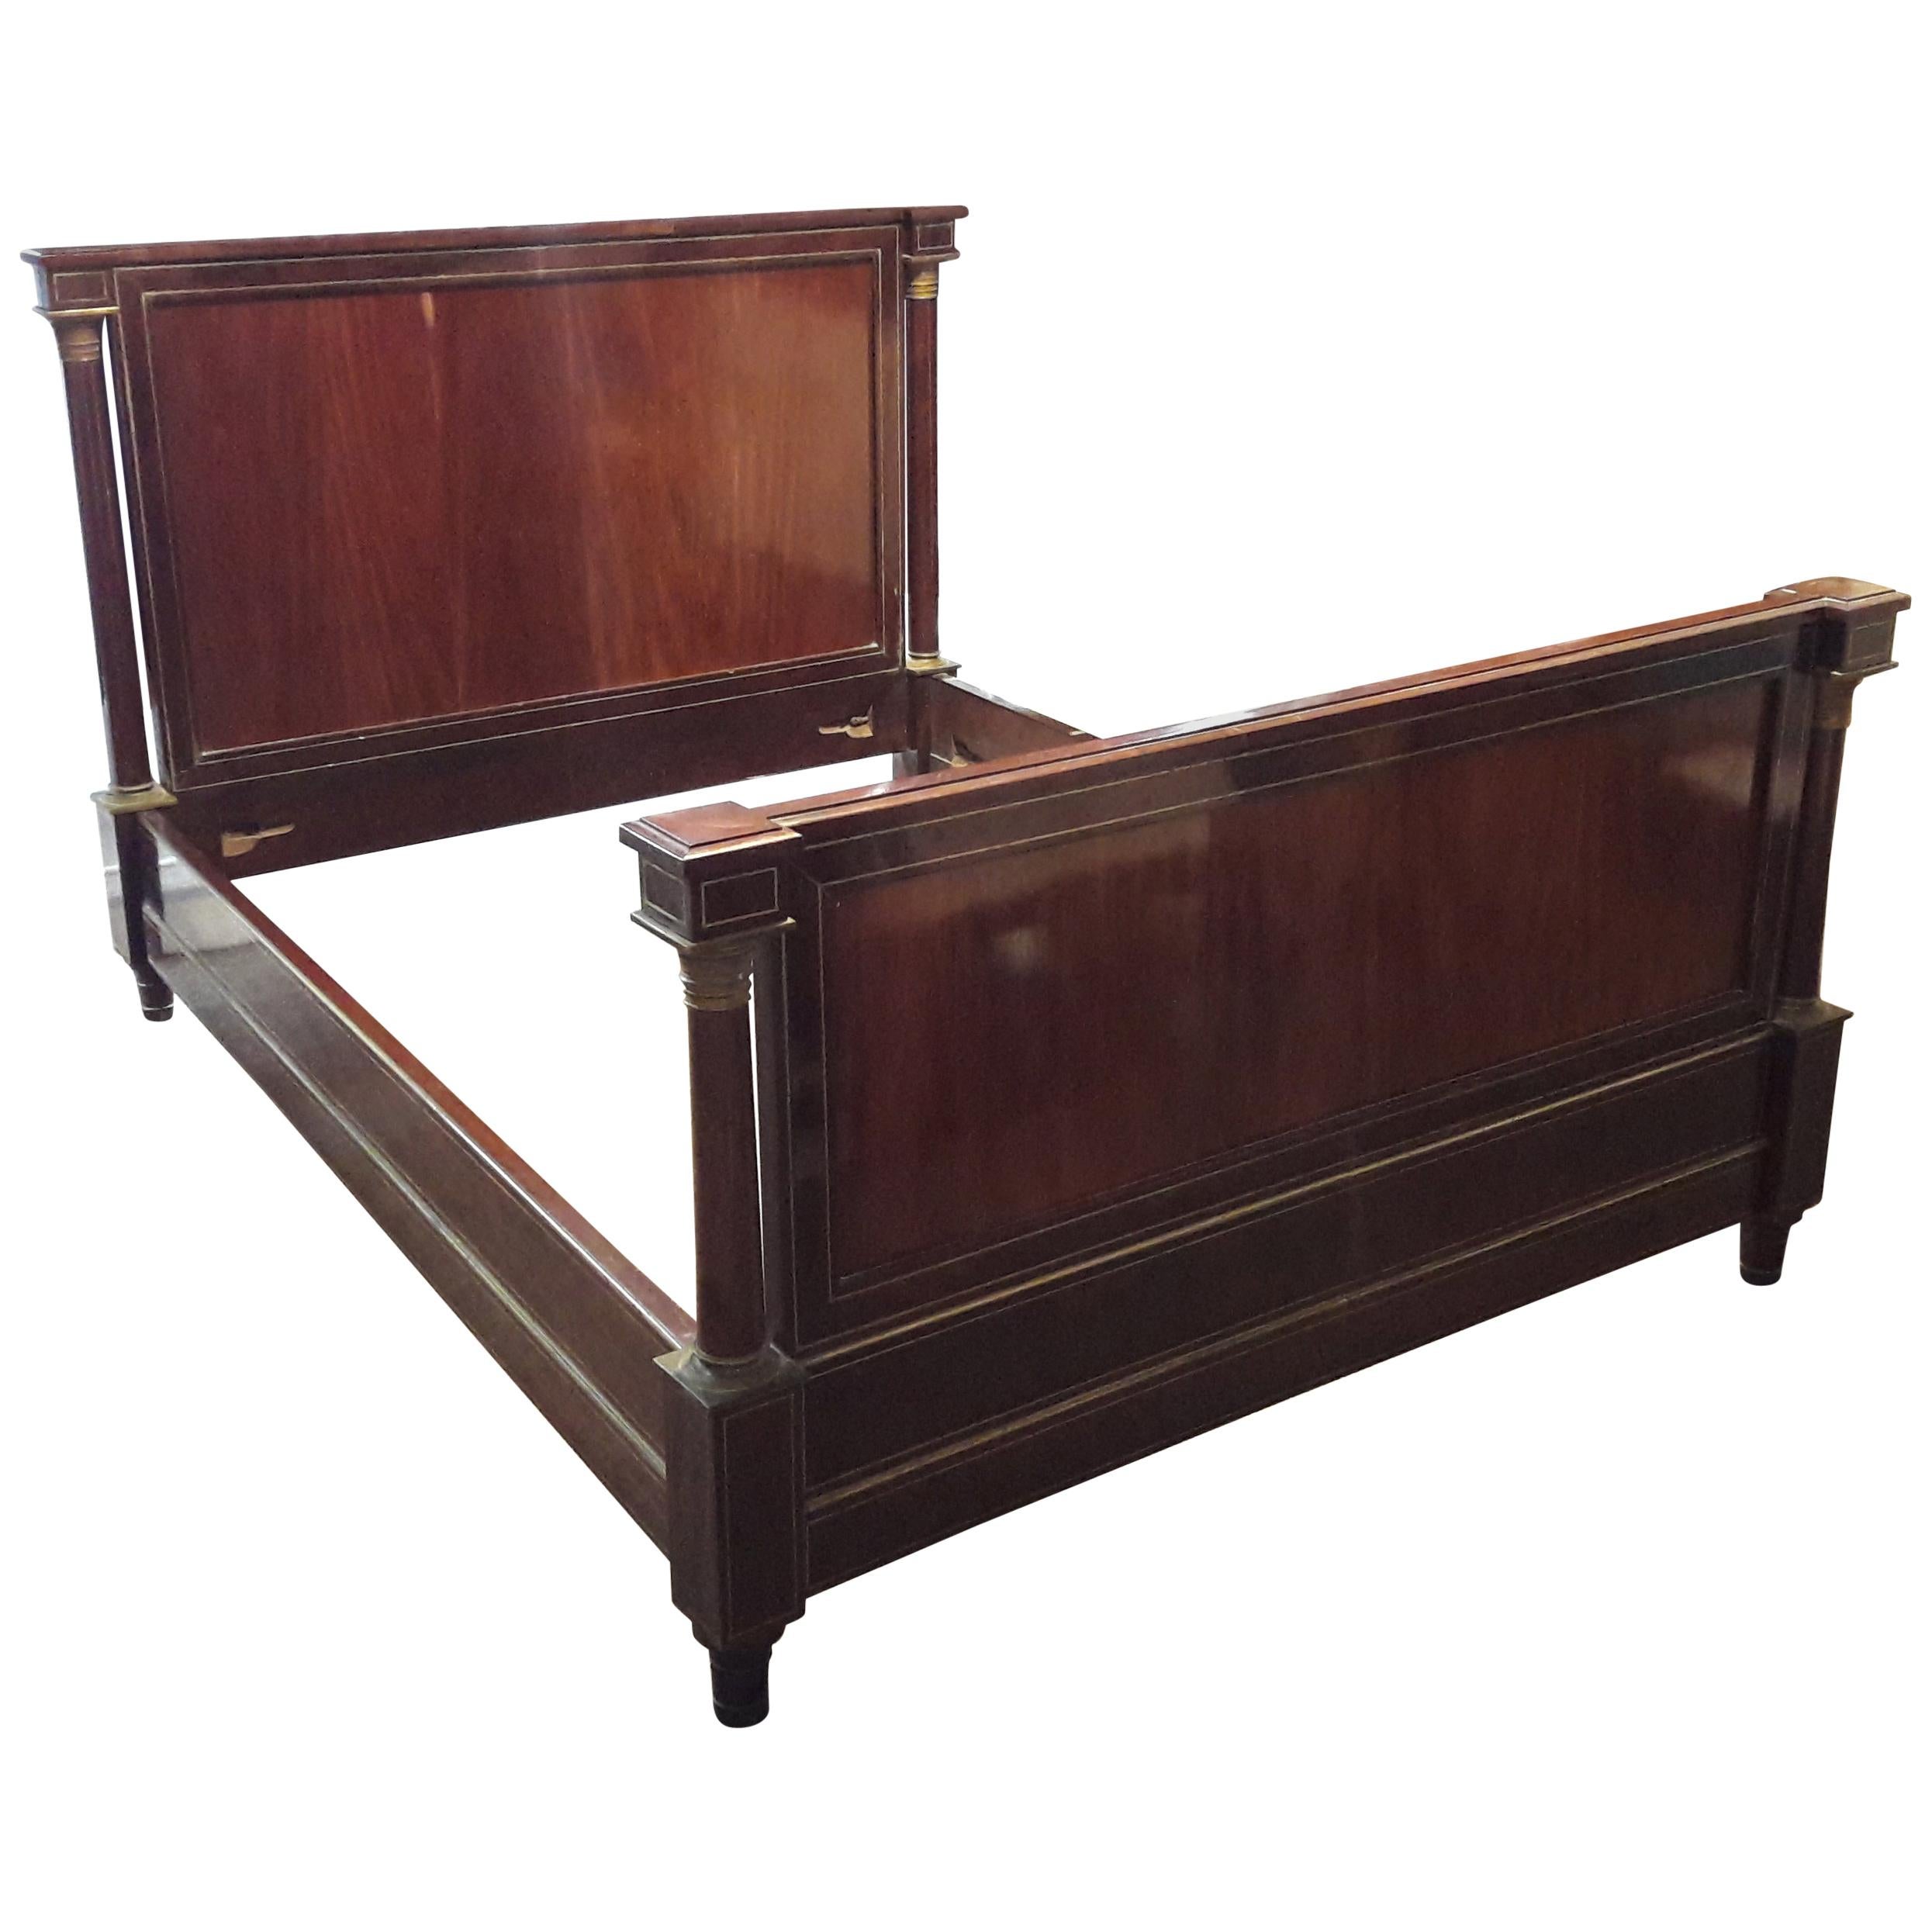 Mahogany Empire Bed Frame For Sale